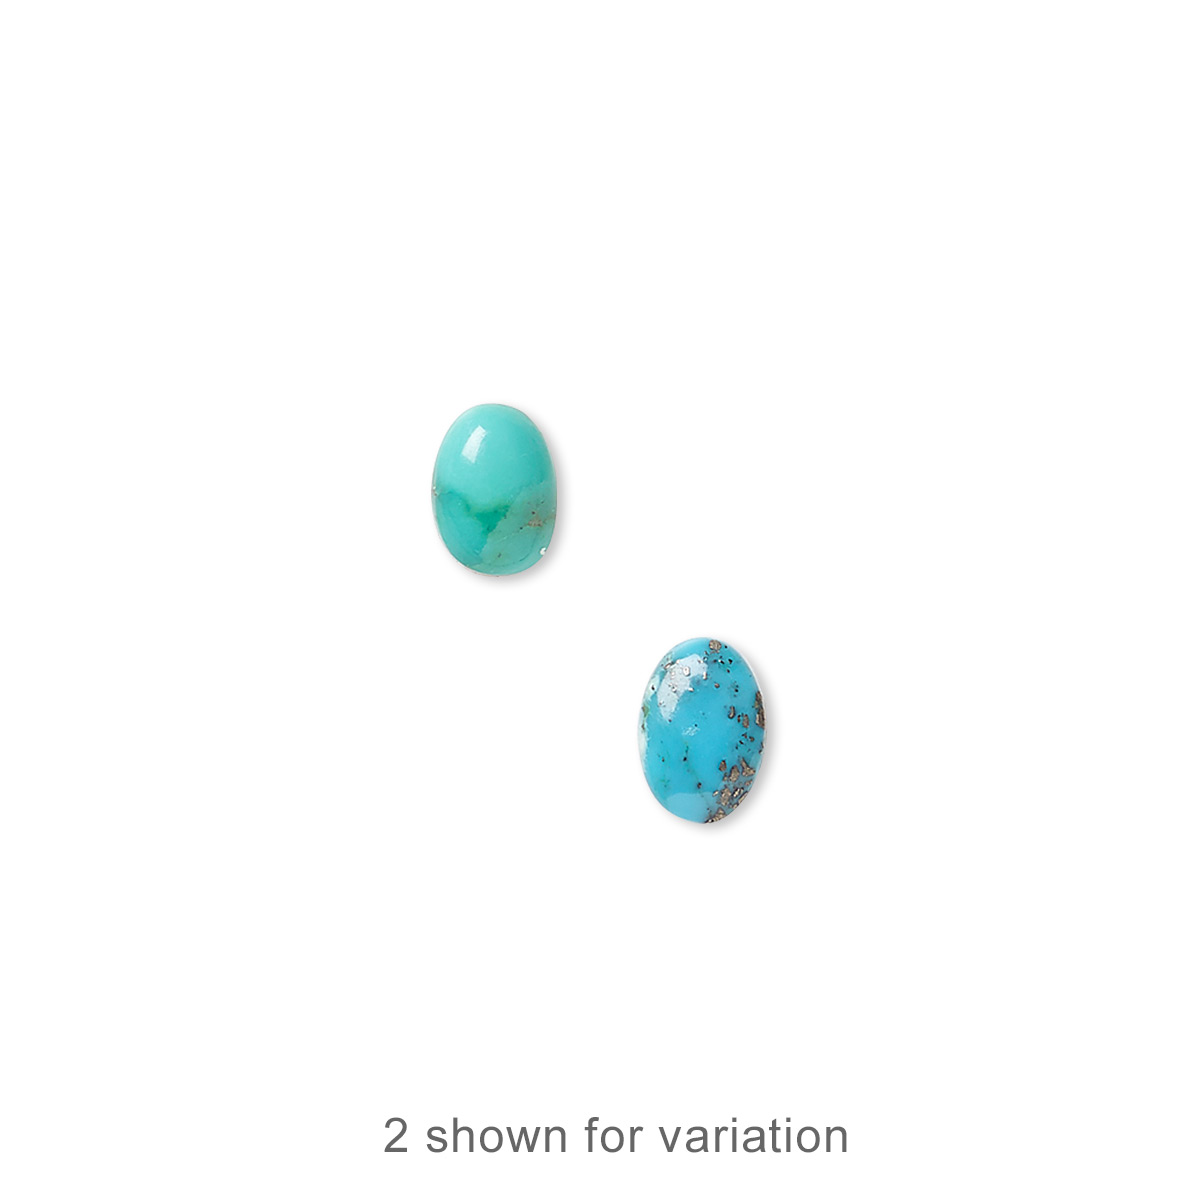 Cabochon Turquoise Dyed Stabilized Blue 7x5mm Calibrated Oval C